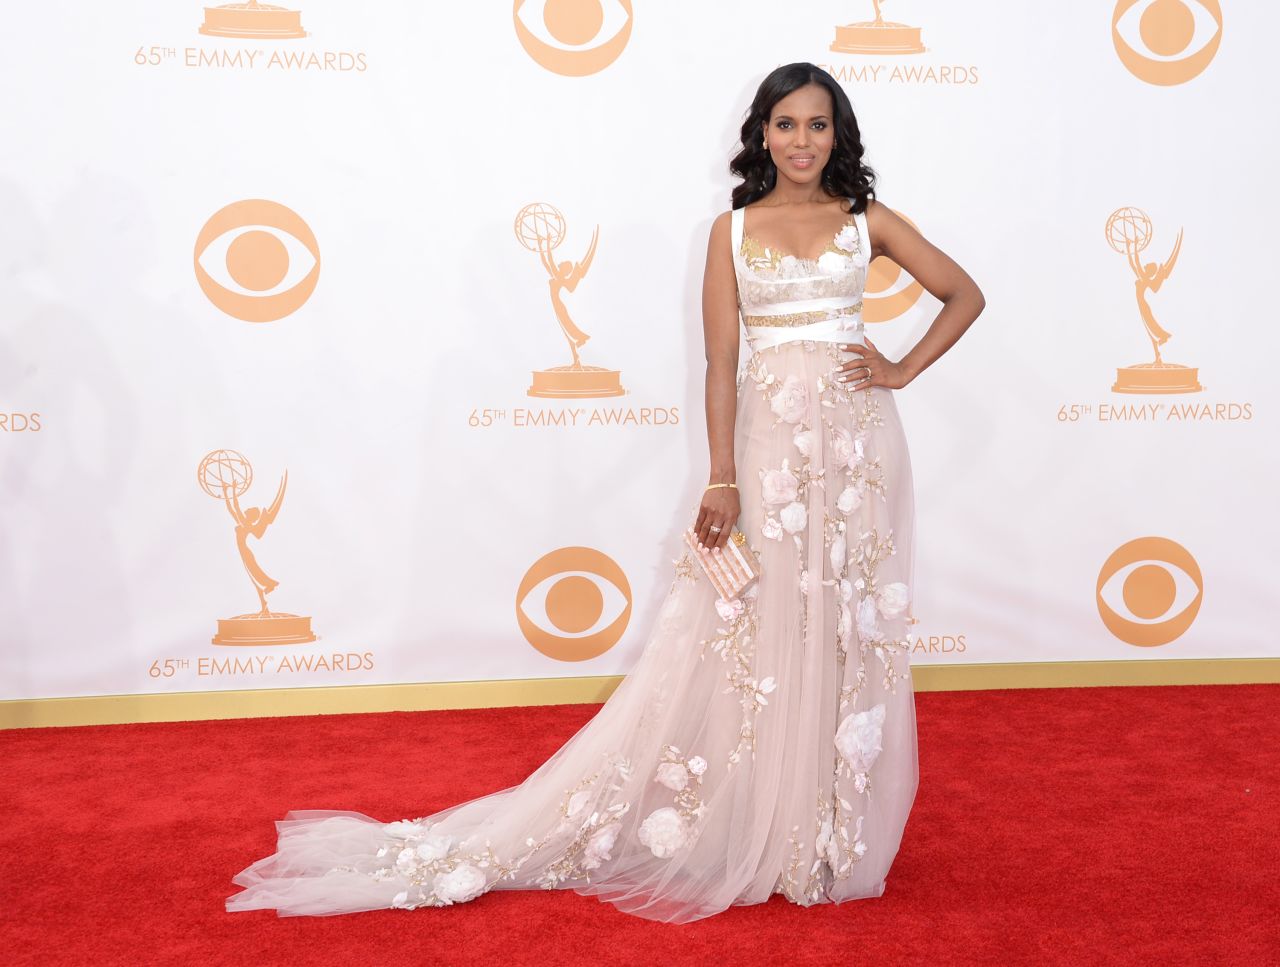 <a href="http://www.cnn.com/2013/09/19/showbiz/tv/emmys-2013-kerry-washington-it-girl/">Kerry Washington</a> was nominated for outstanding lead actress in a drama series for her portrayal of Olivia Pope on "Scandal." 